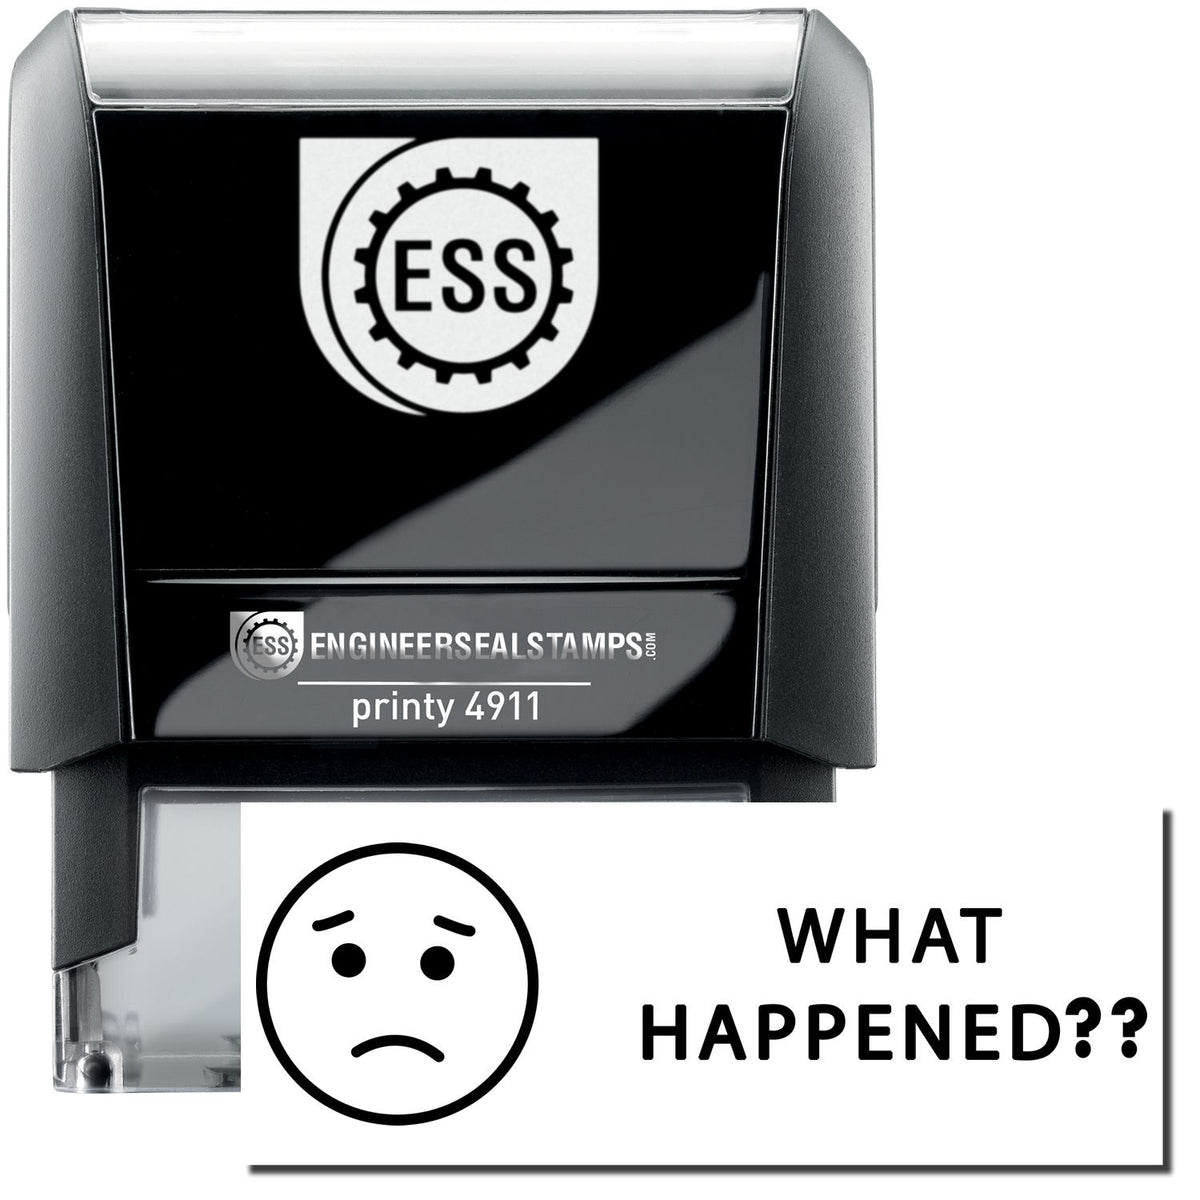 A self-inking stamp with a stamped image showing how the text &quot;WHAT HAPPENED??&quot; in bold font with an image of a sad face on the left is displayed after stamping.